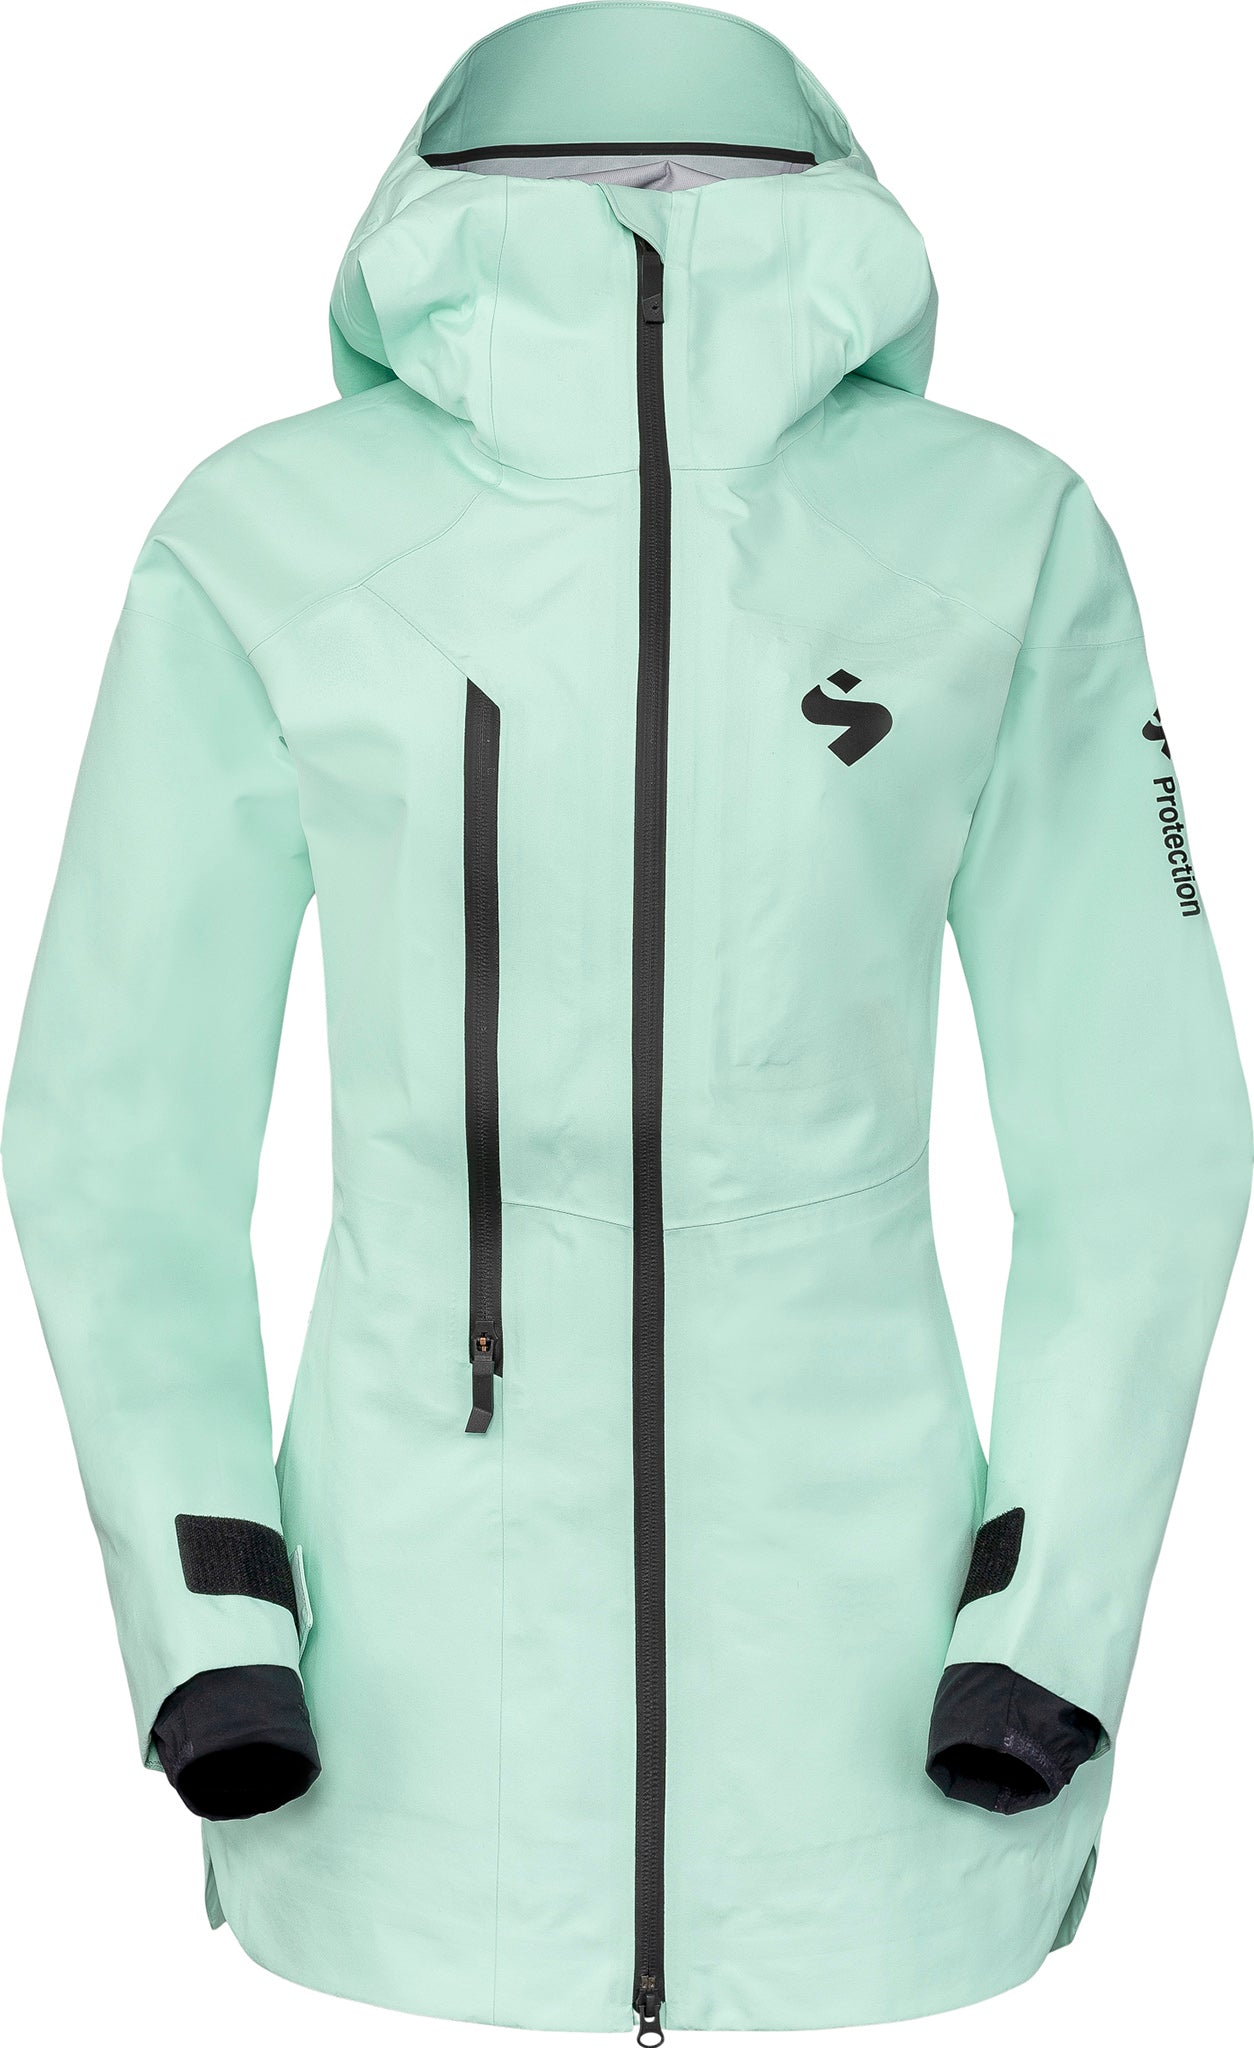 Sweet Protection Crusader X Gore-Tex Jacket - Women's | Altitude